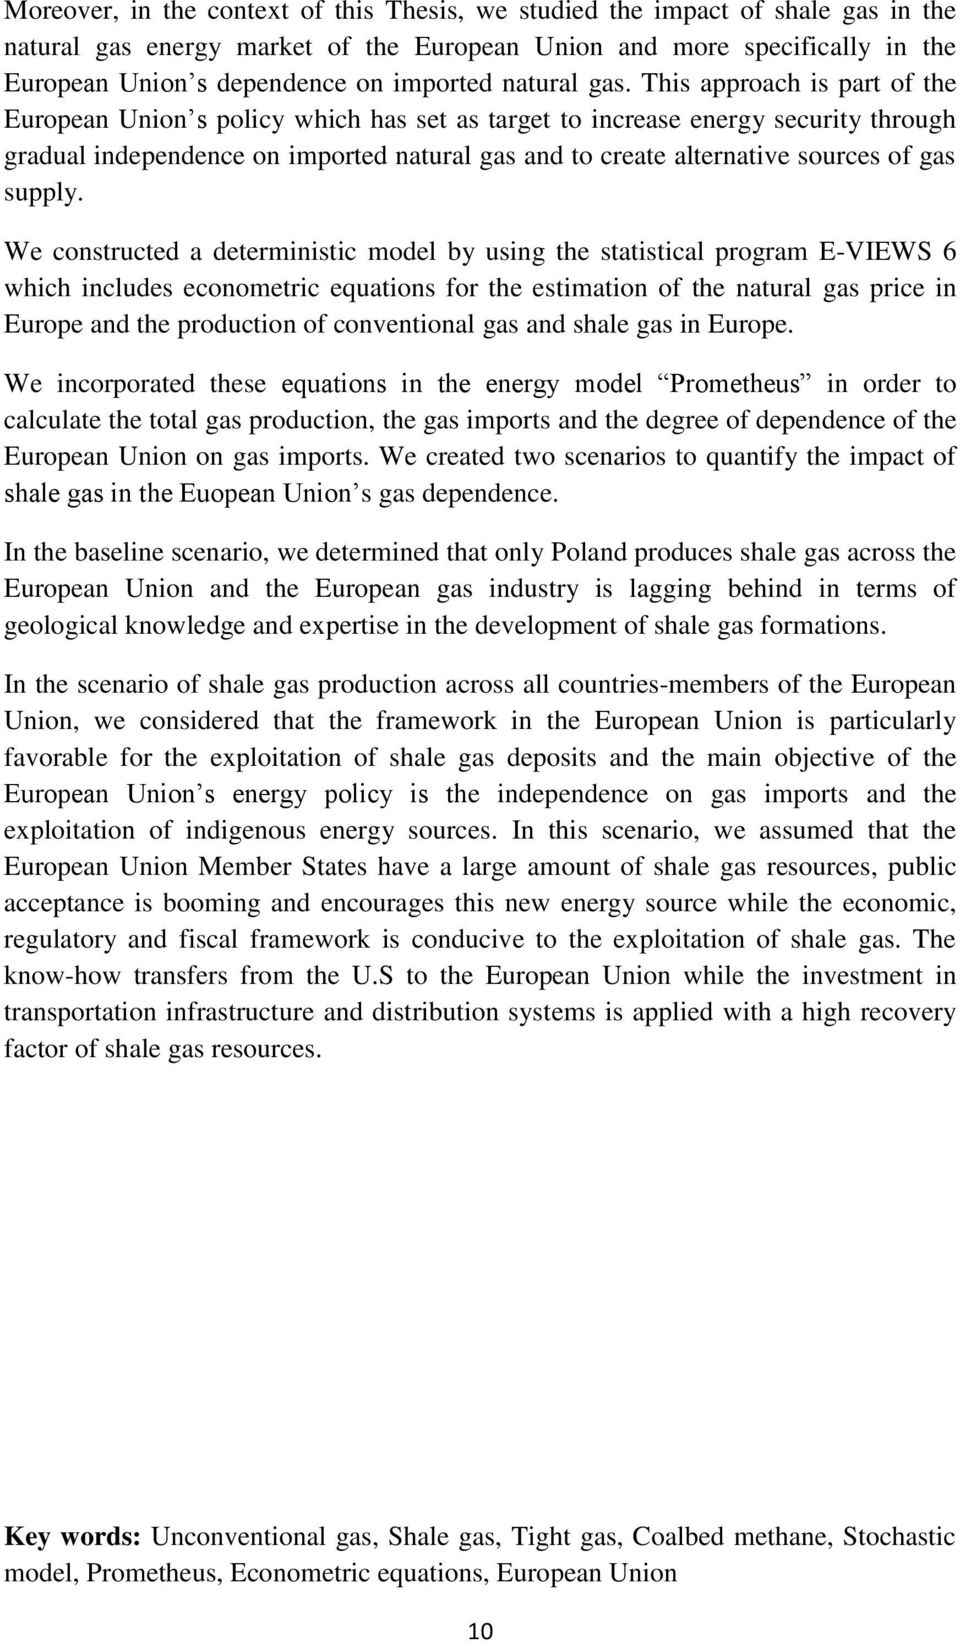 This approach is part of the European Union s policy which has set as target to increase energy security through gradual independence on imported natural gas and to create alternative sources of gas